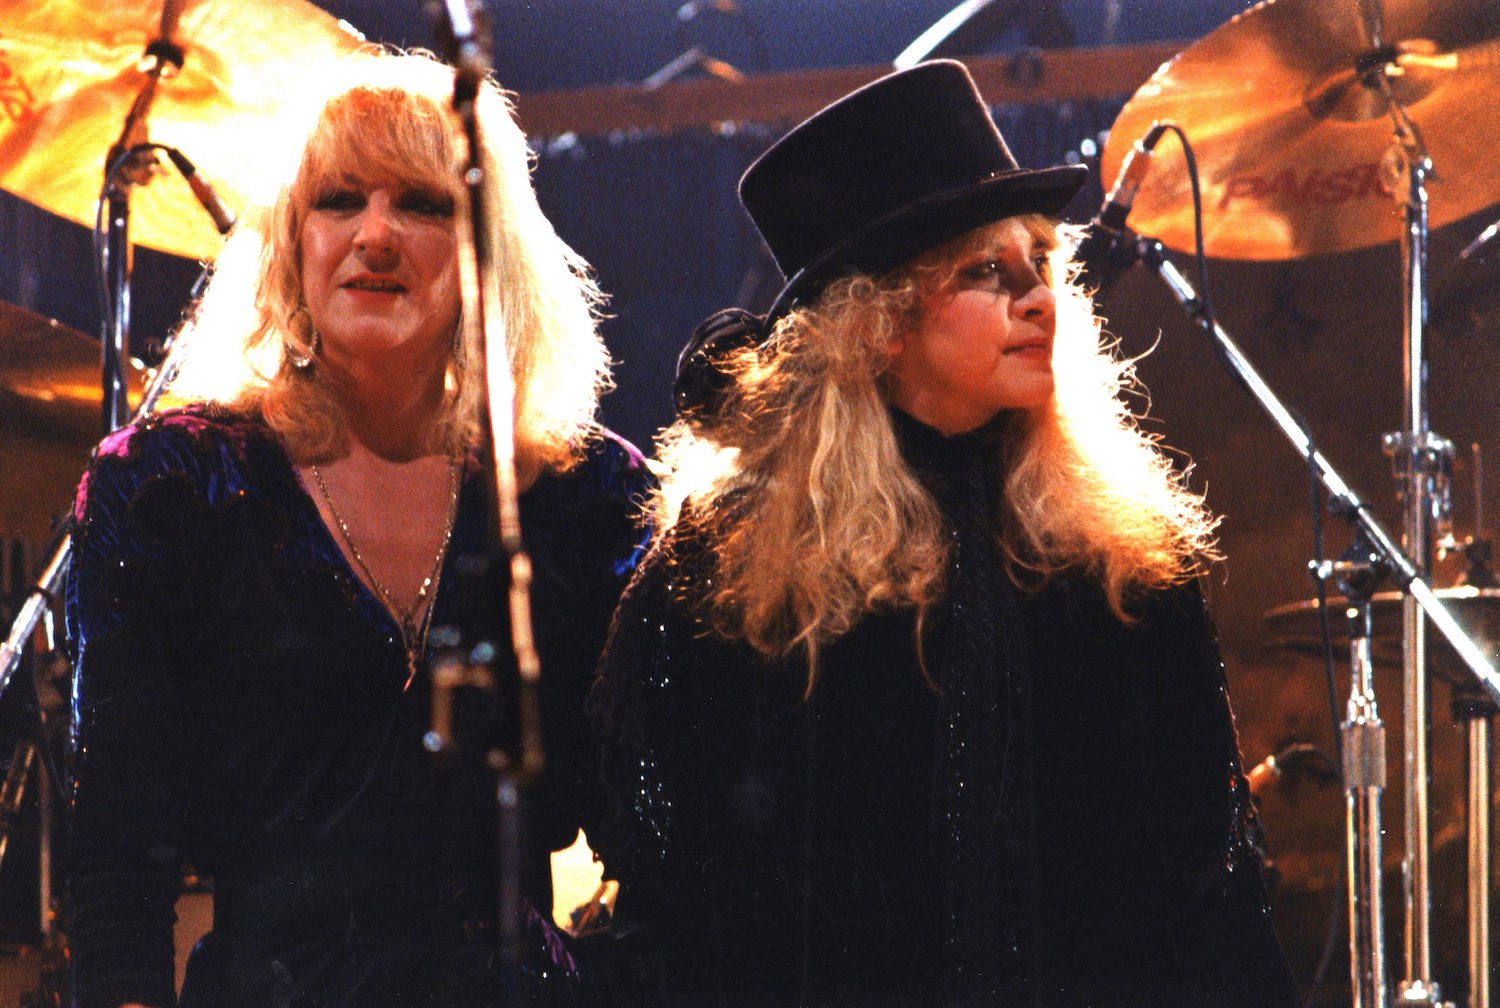 Christine McVie and Stevie Nicks of Fleetwood Mac perform on stage at Wembley Arena